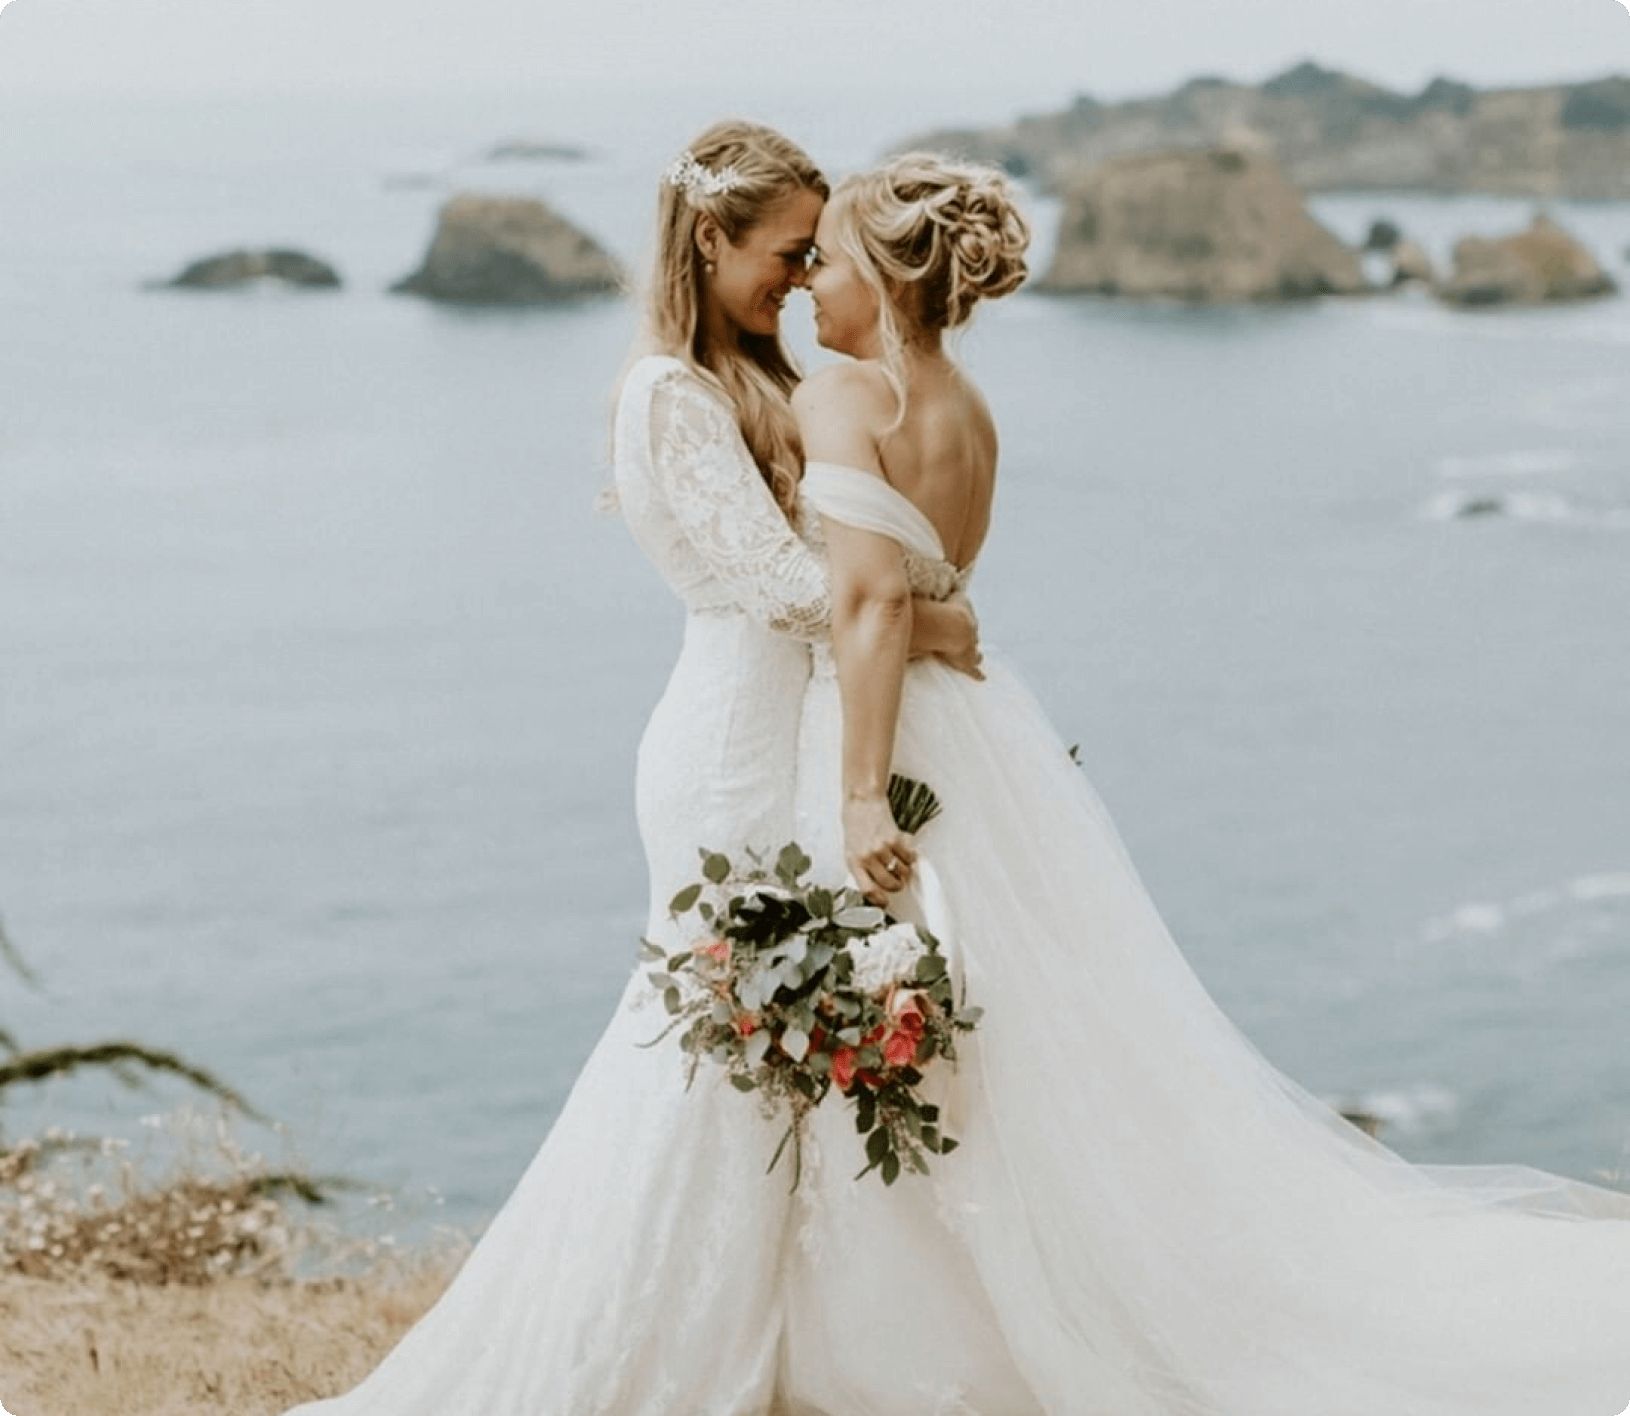 Two brides embracing each other on a cliff side